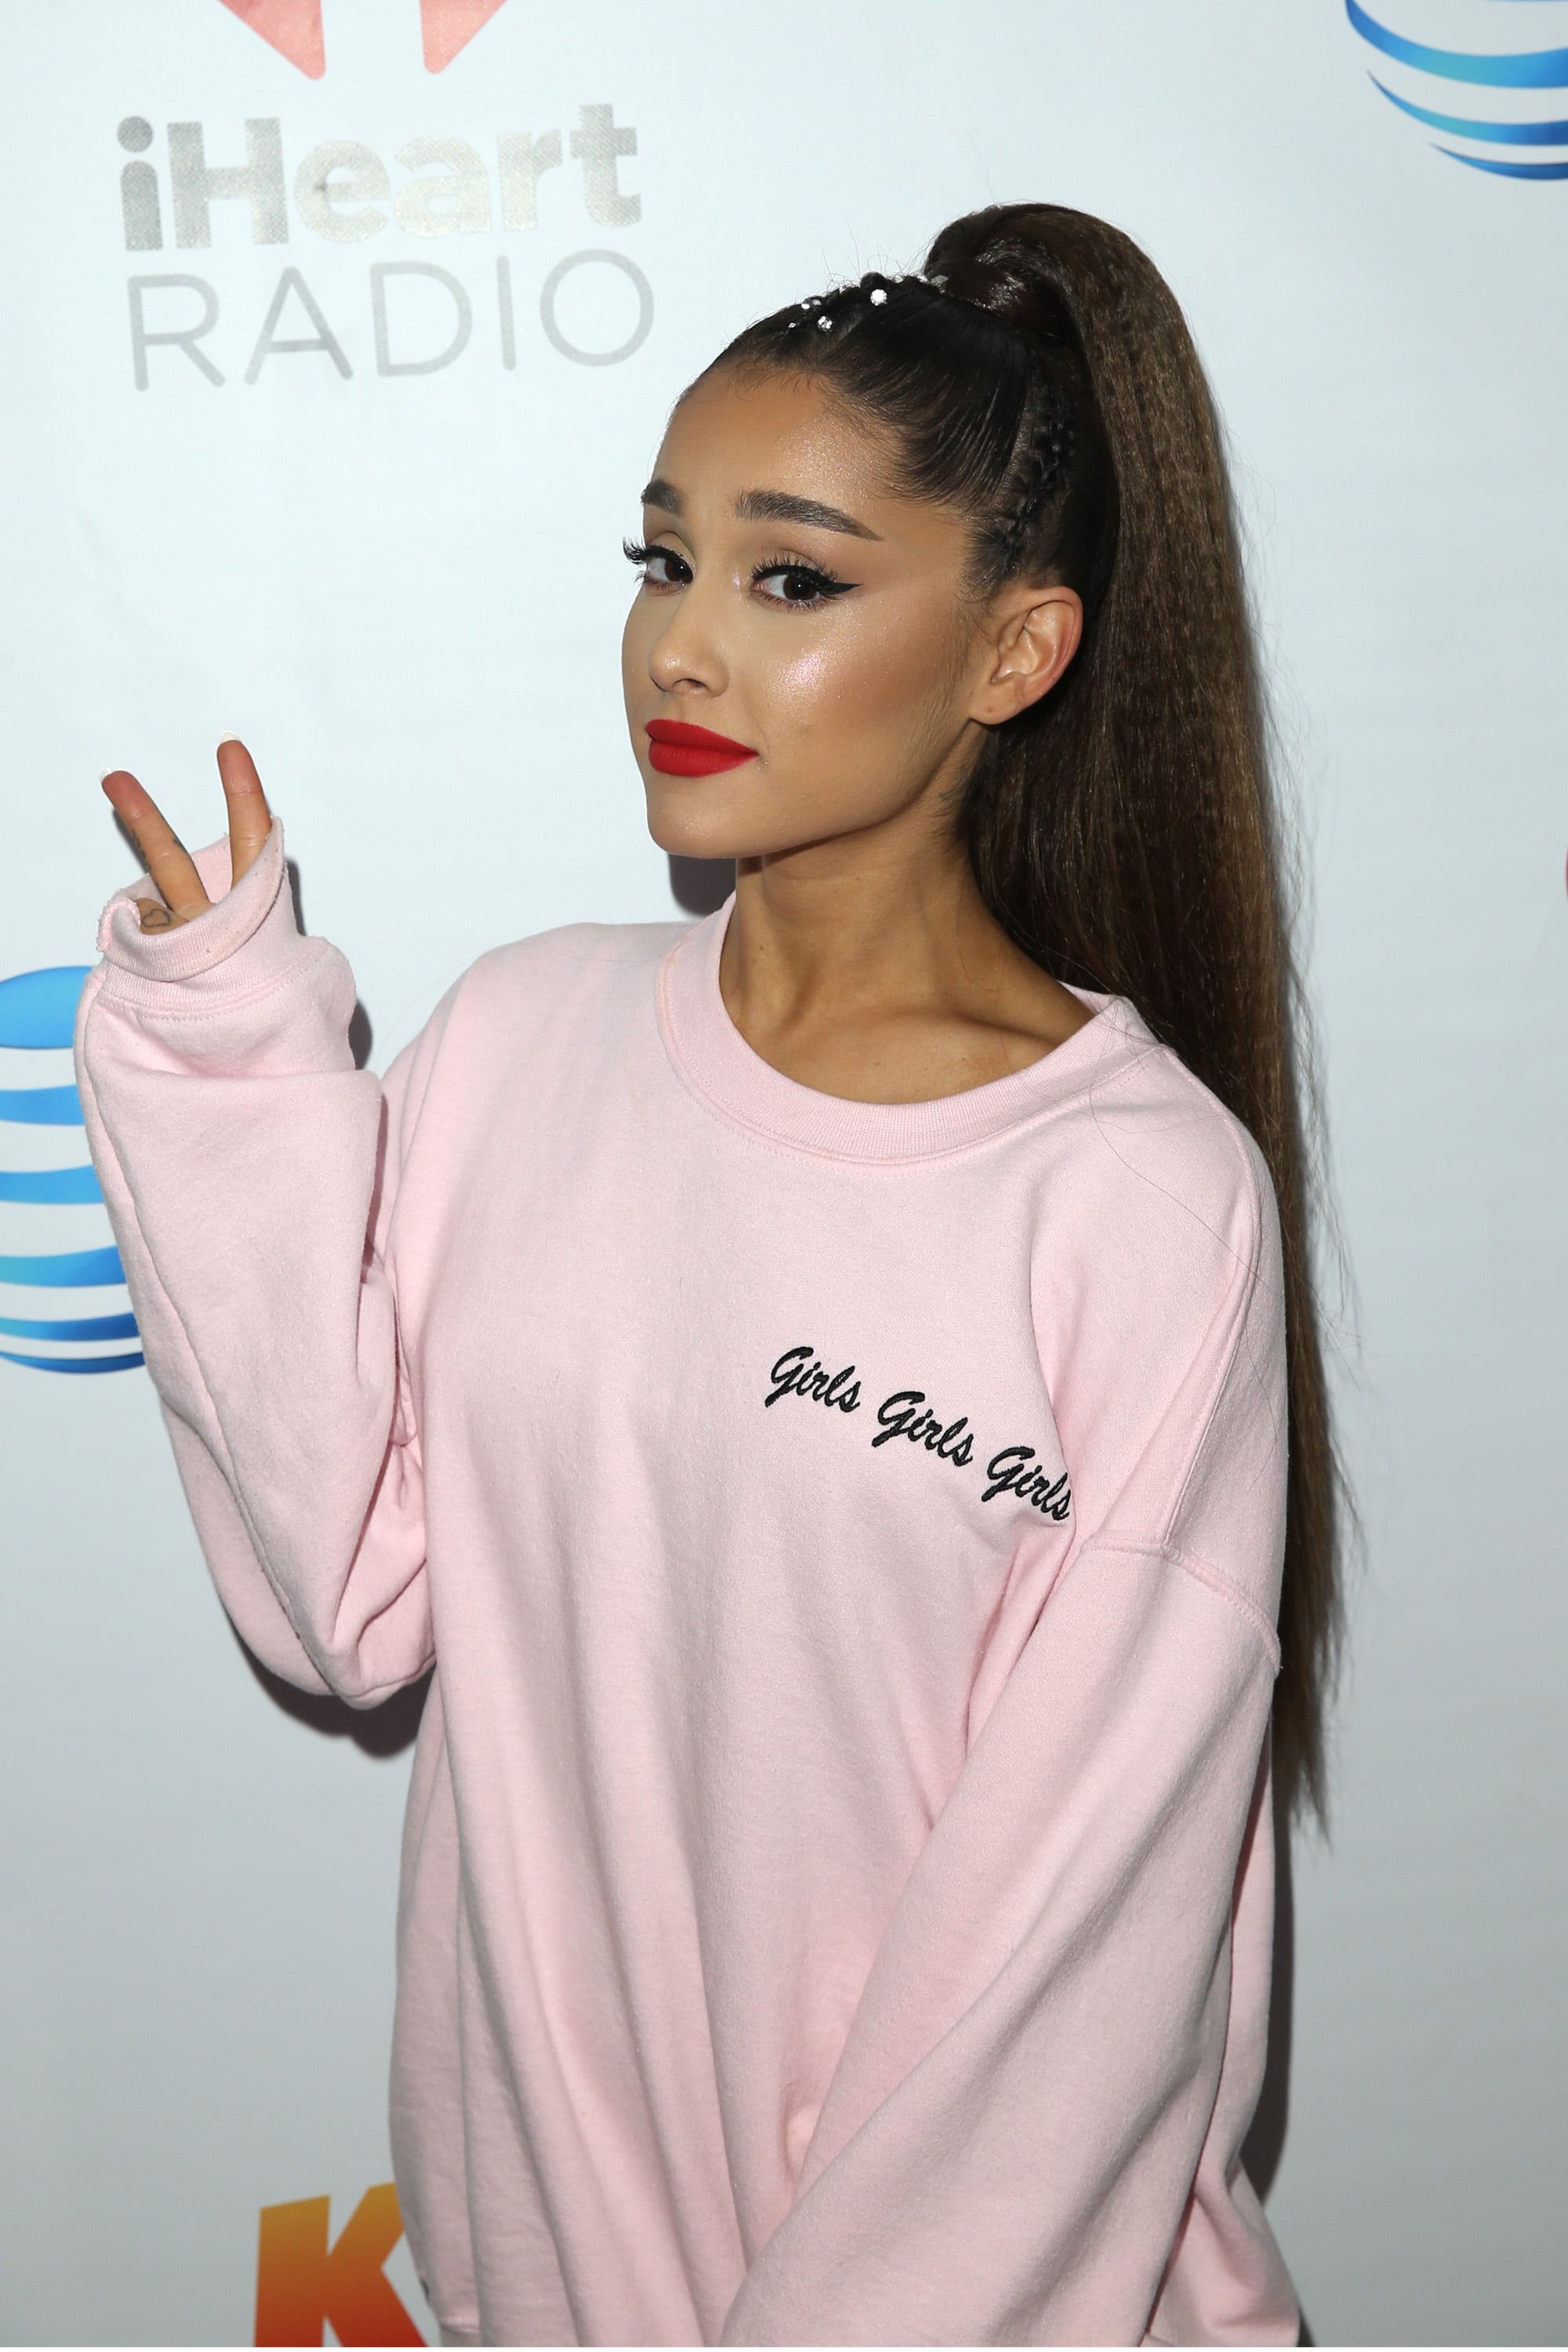 LOS ANGELES, CA - JUNE 02:  (EDITORIAL USE ONLY. NO COMMERCIAL USE) Ariana Grande backstage at the 2018 iHeartRadio Wango Tango by AT&T at Banc of California Stadium on June 2, 2018 in Los Angeles, California.  (Photo by Jesse Grant/Getty Images for iHeartMedia)